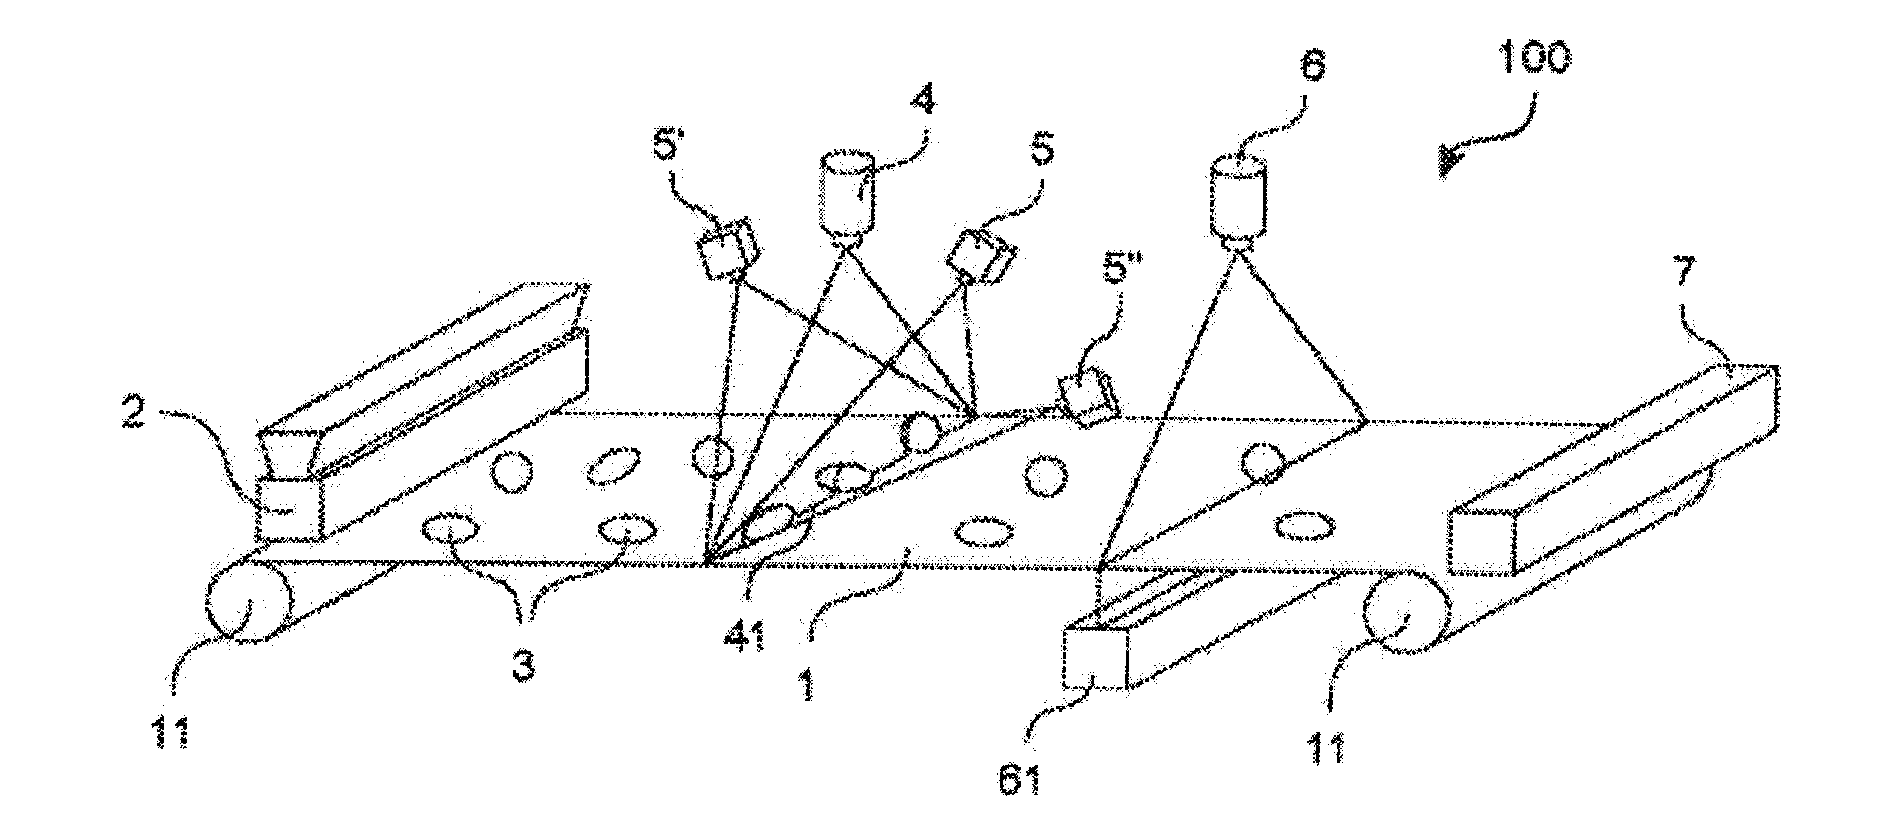 Method for classifying objects contained in seed lots and corresponding use for producing seed